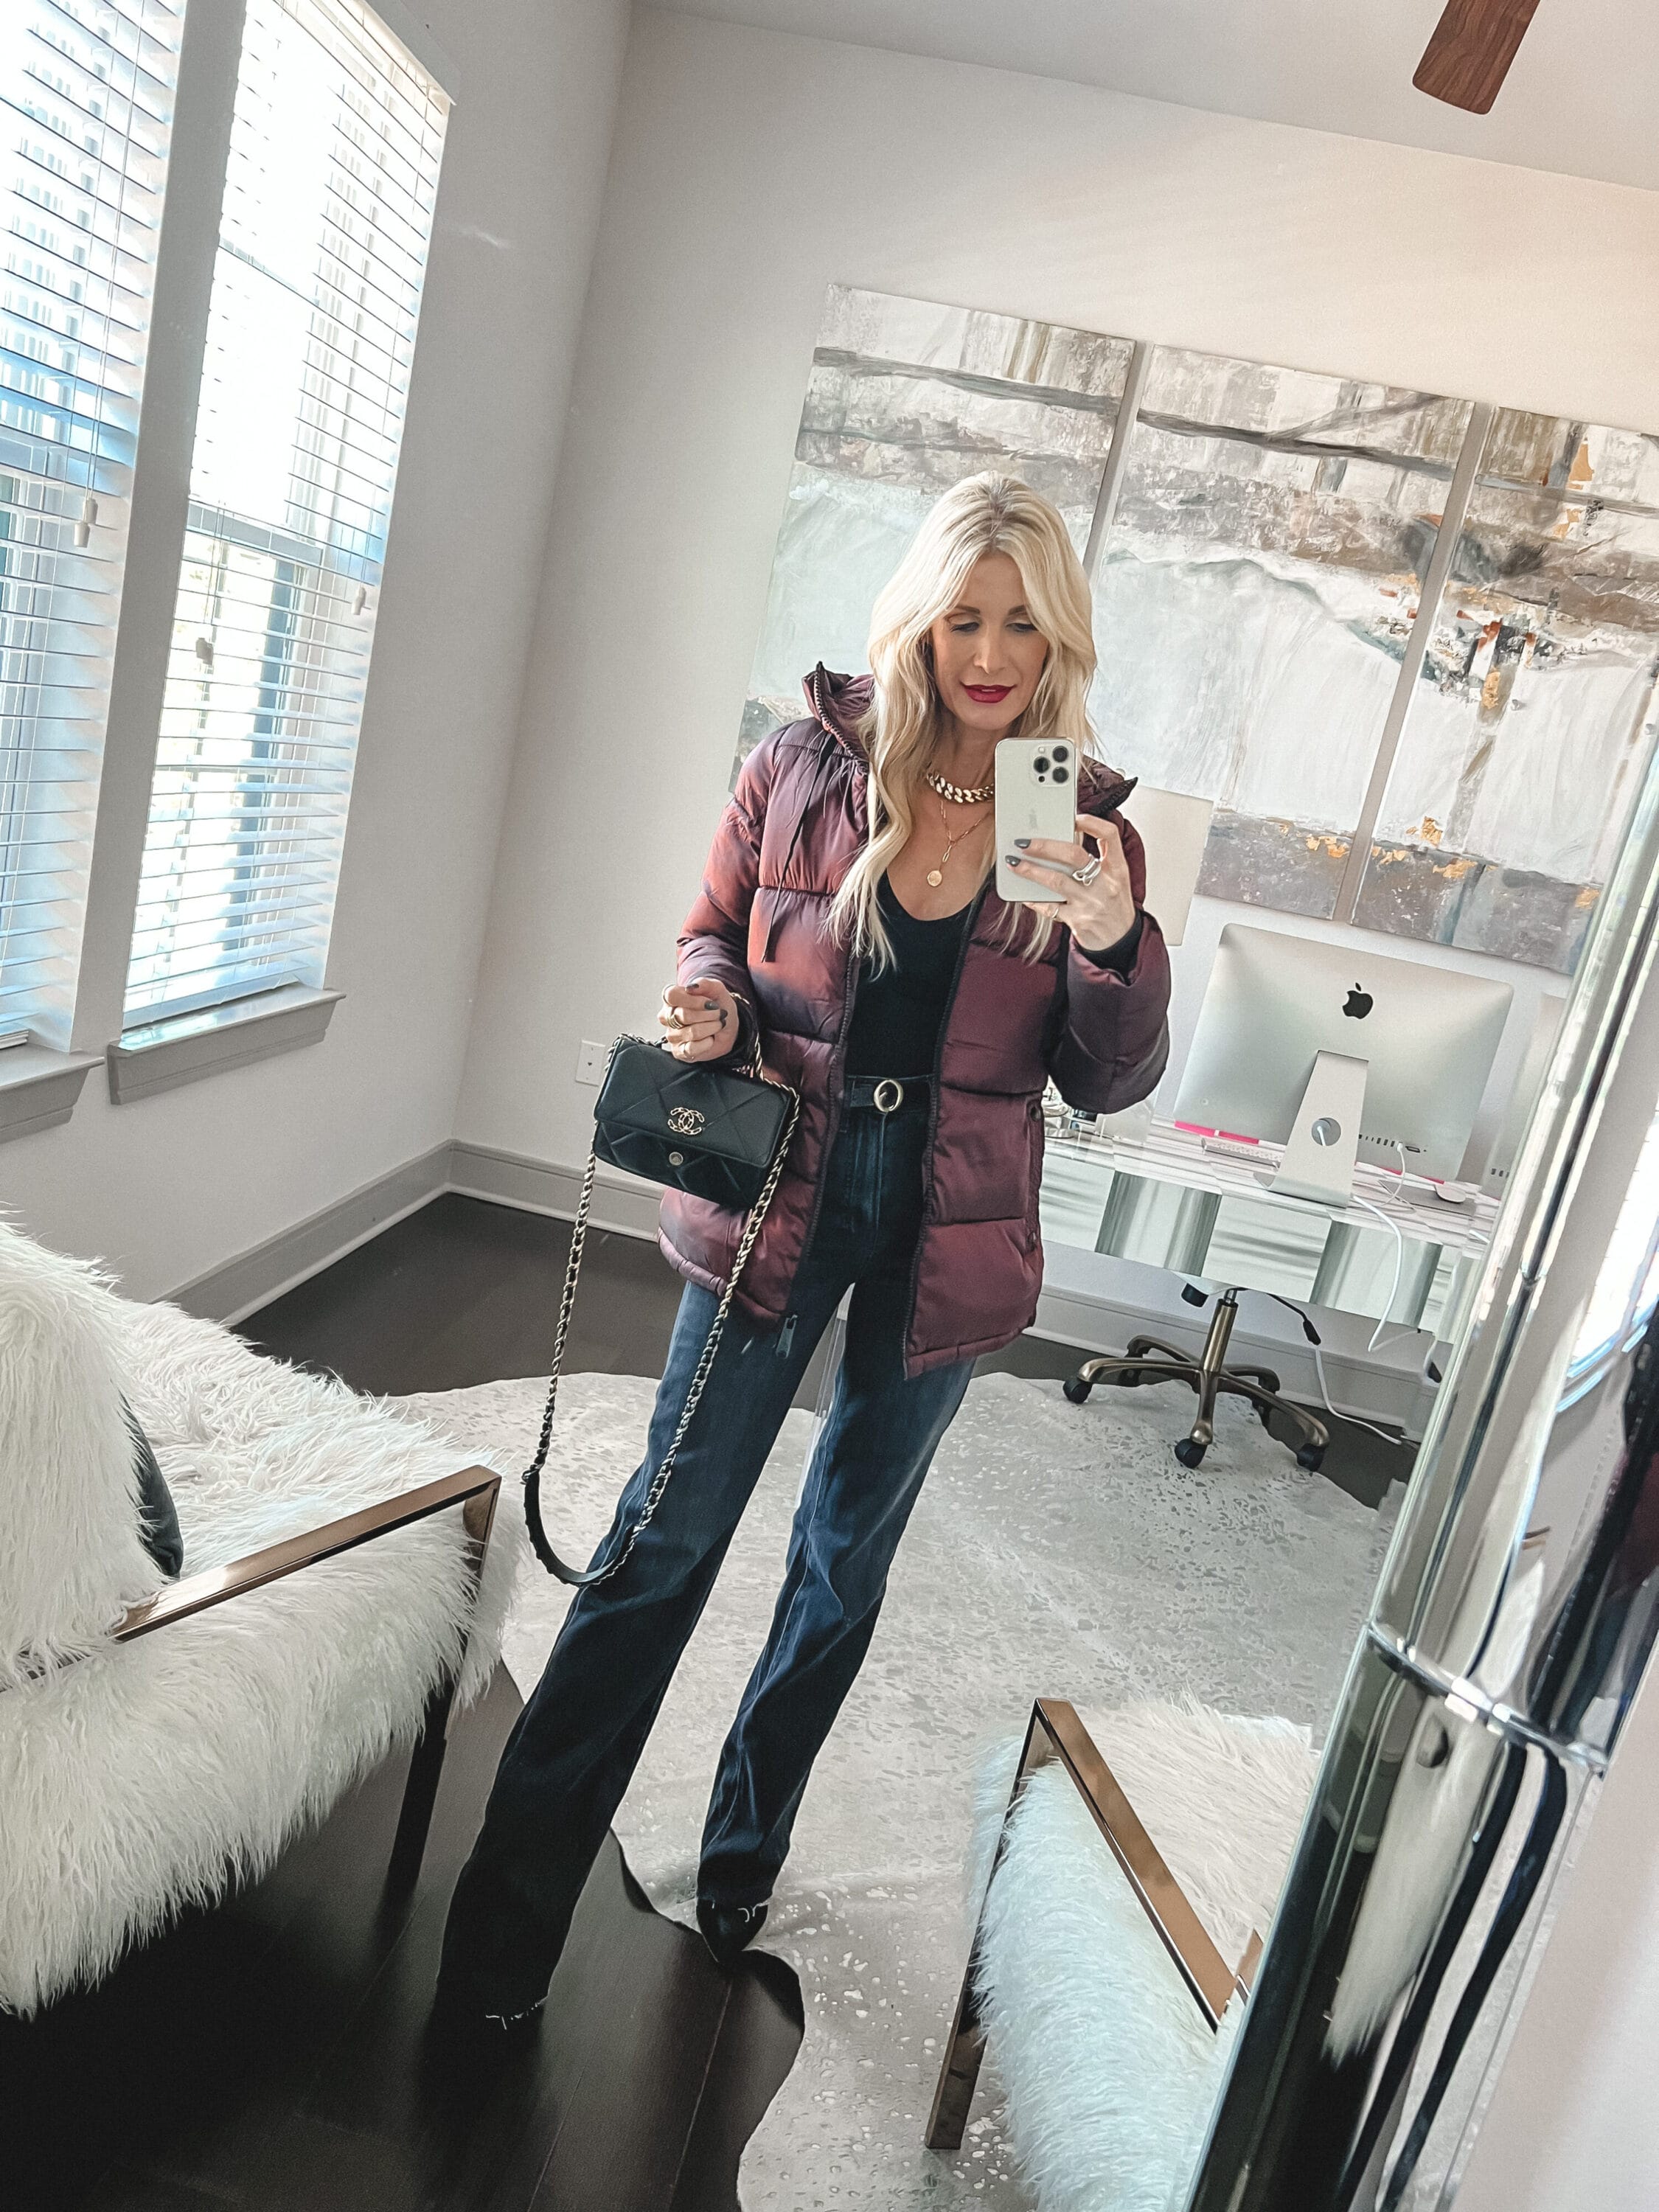 Over 40 fashion influencer wearing wine colored puffer jacket with black vintage jeans and black heels in a featured look found in the winter coat edit.